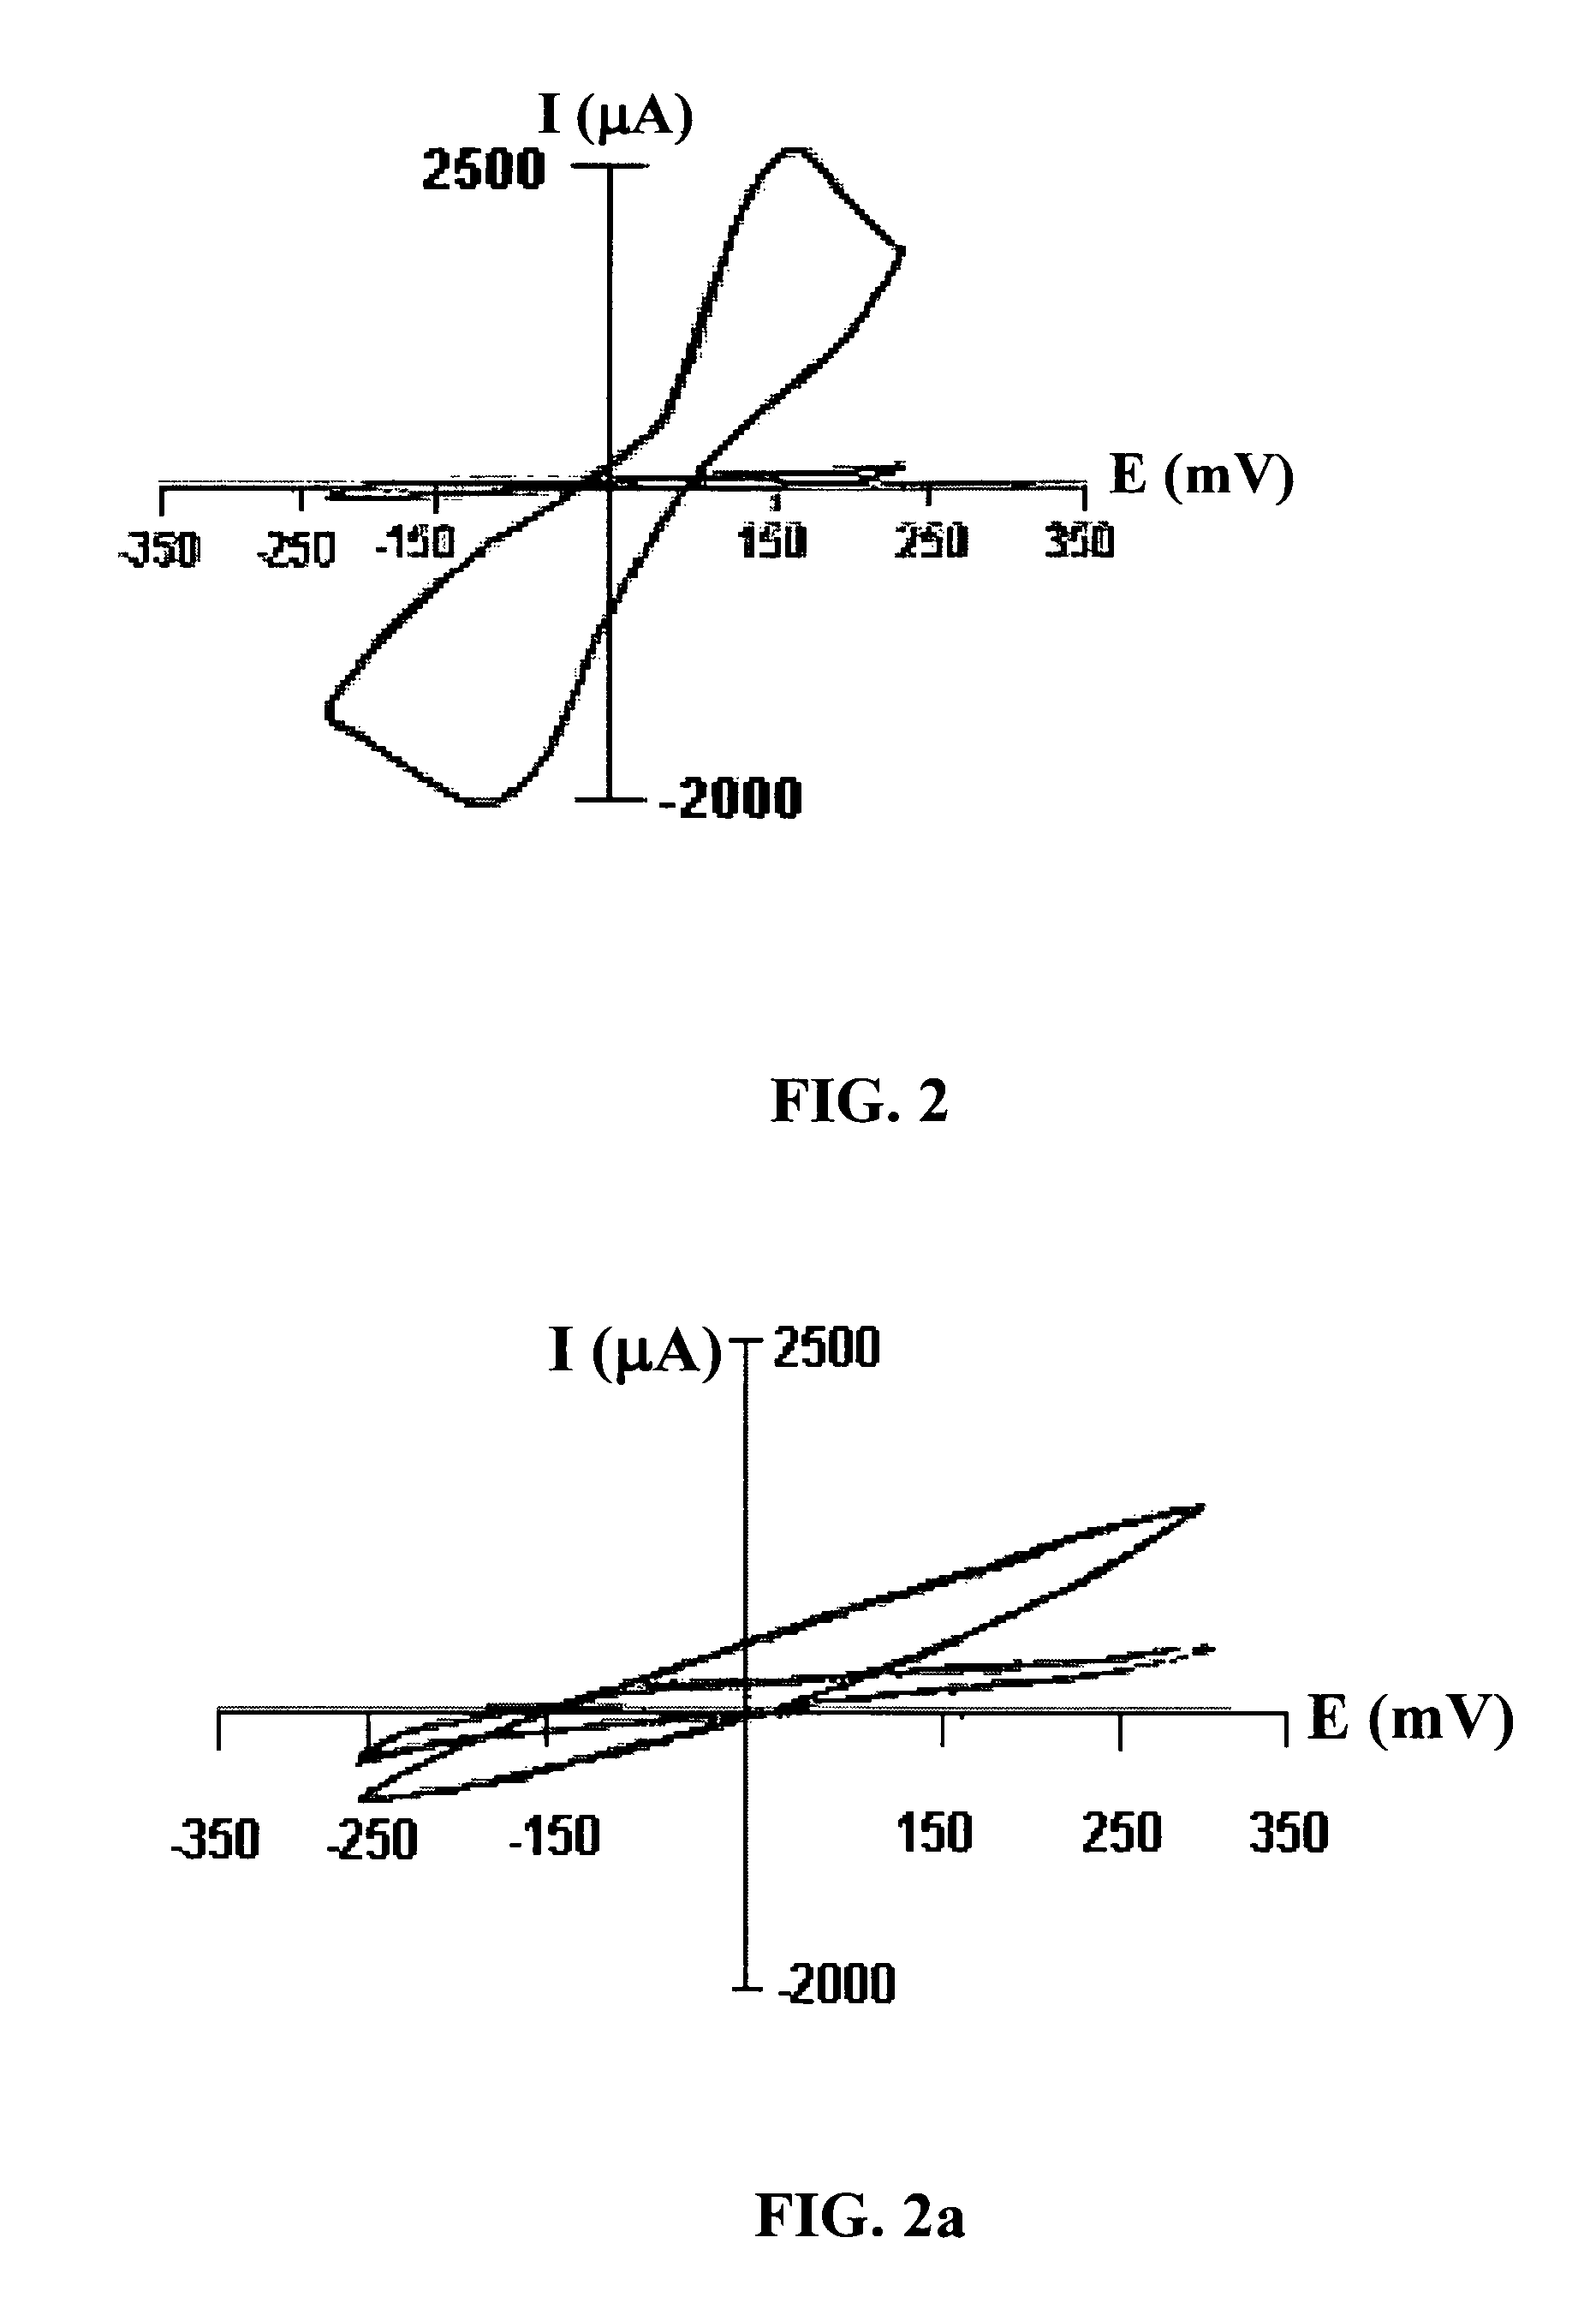 Method and apparatus for the detection of pathogens, parasites, and toxins